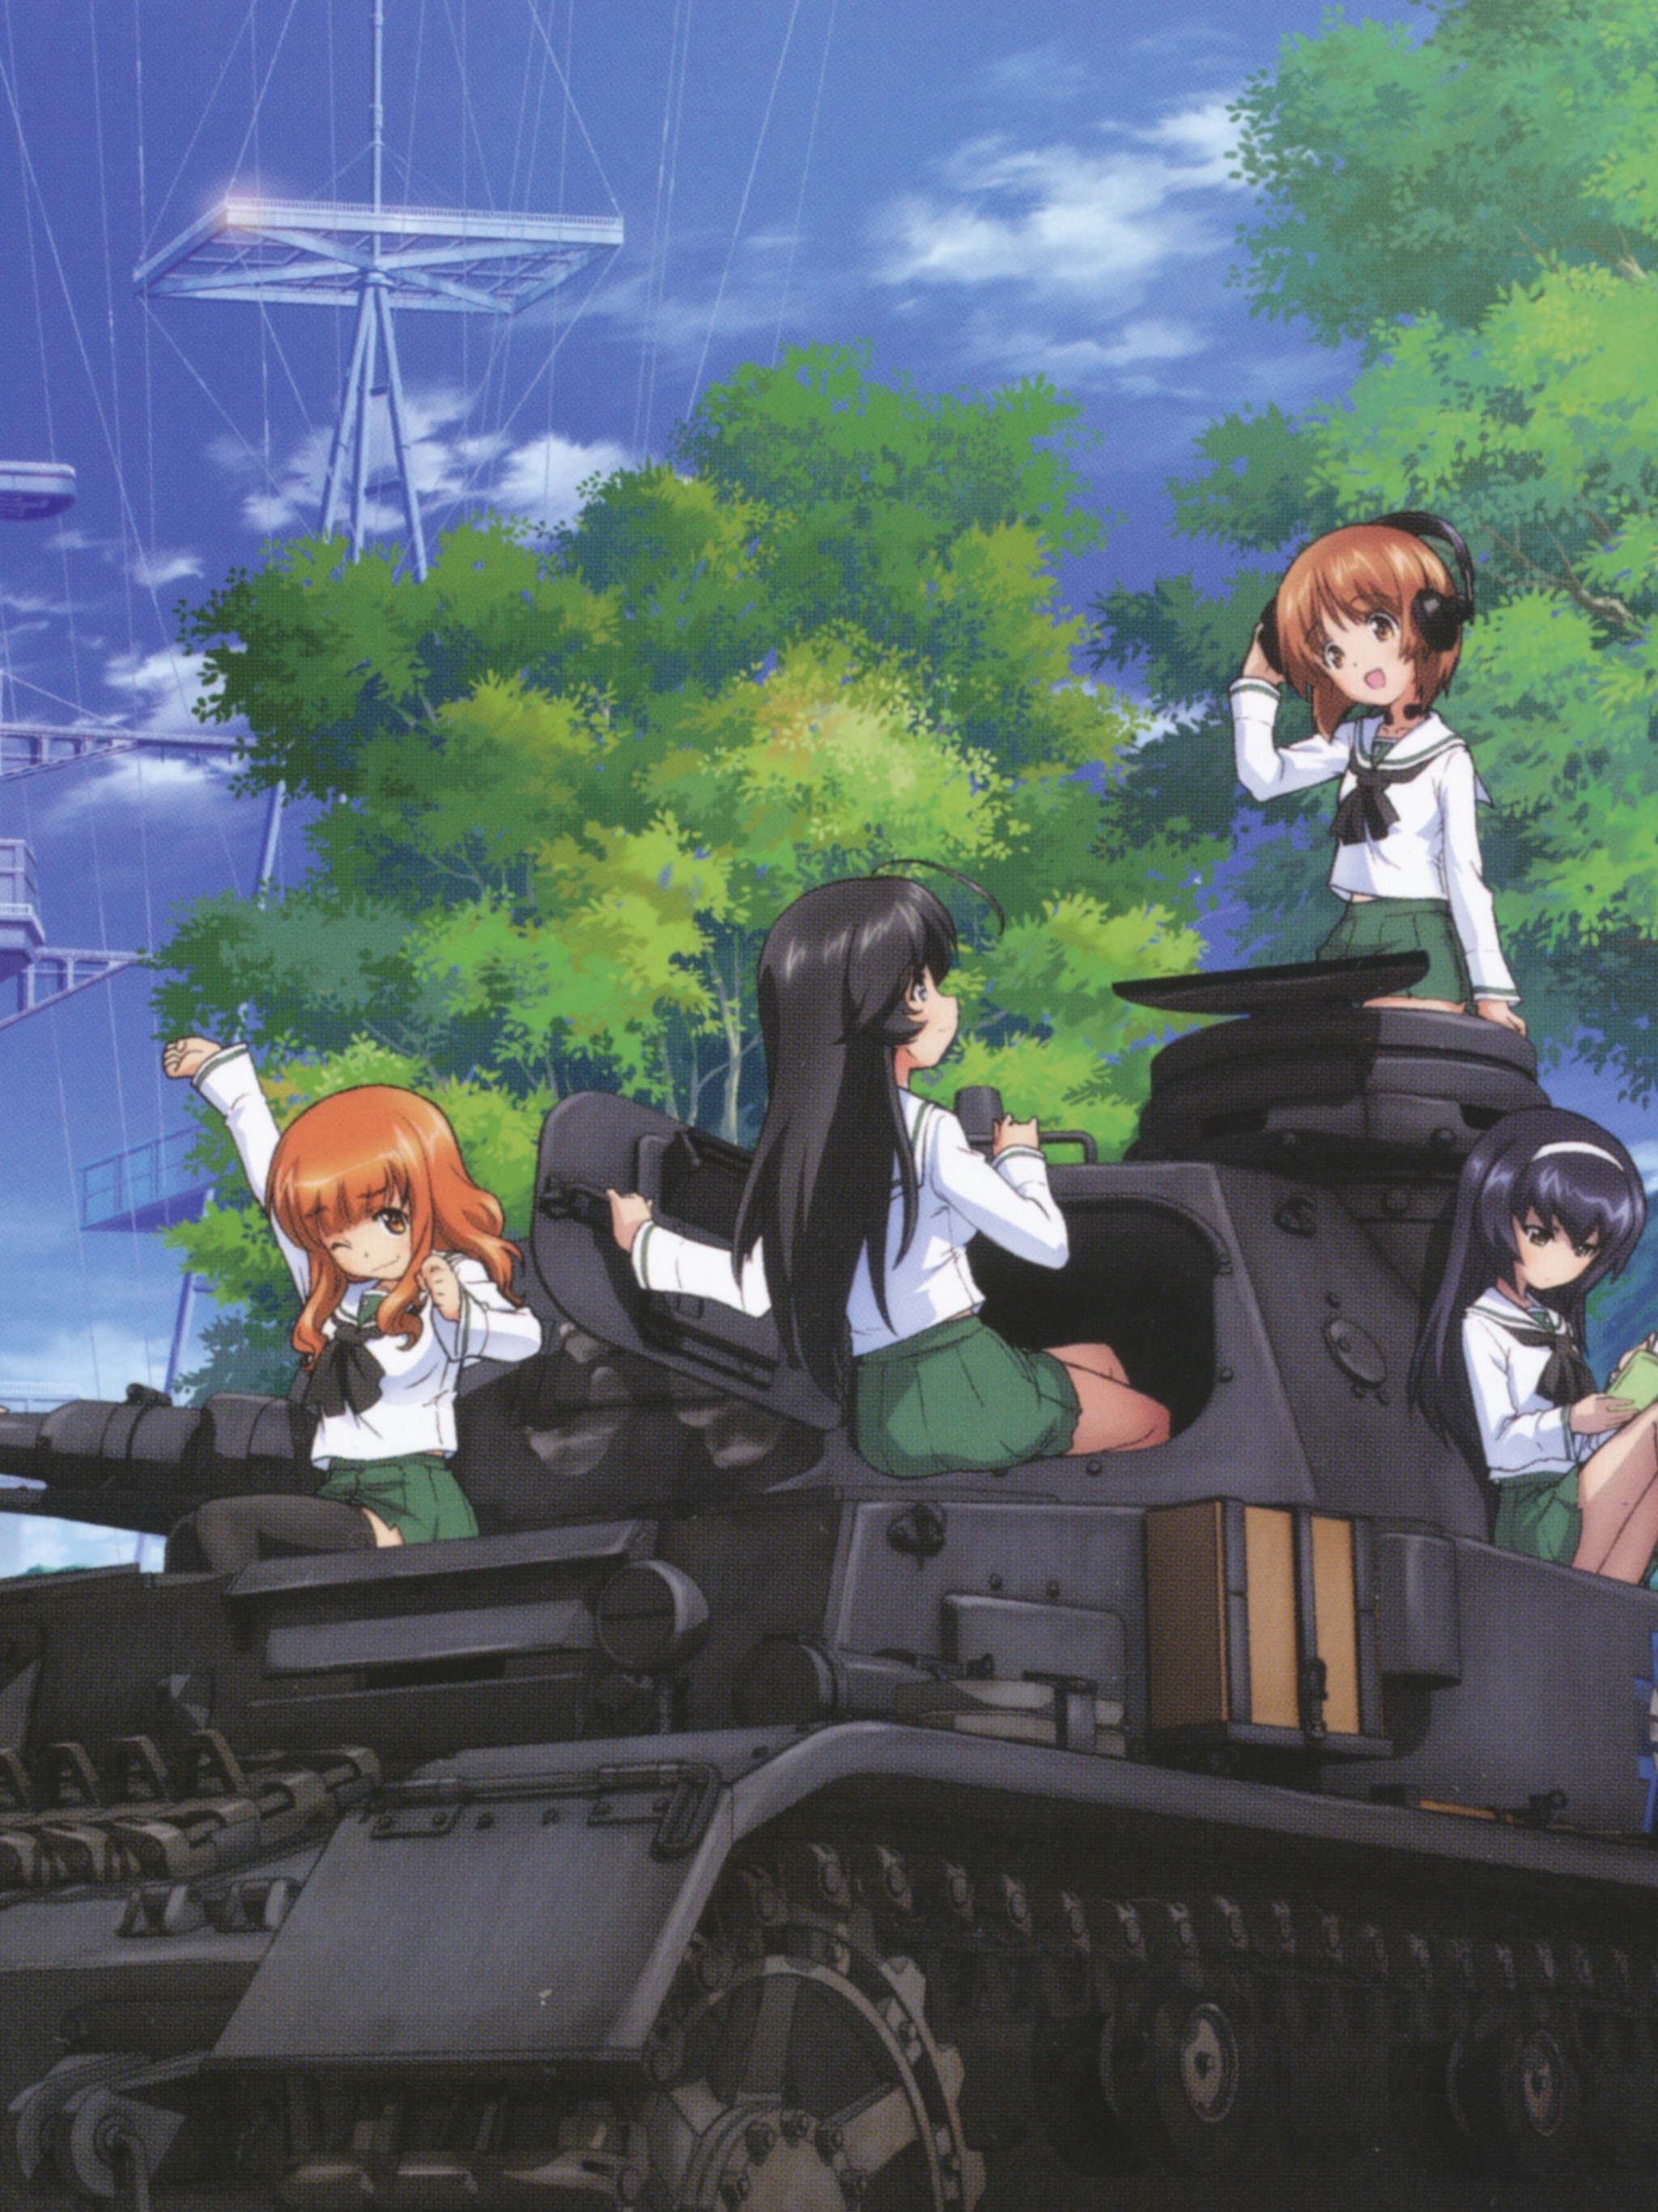 Download Anime Girl Love, Anime Girl Und Panzer Wallpaper - Girls And Panzer , HD Wallpaper & Backgrounds